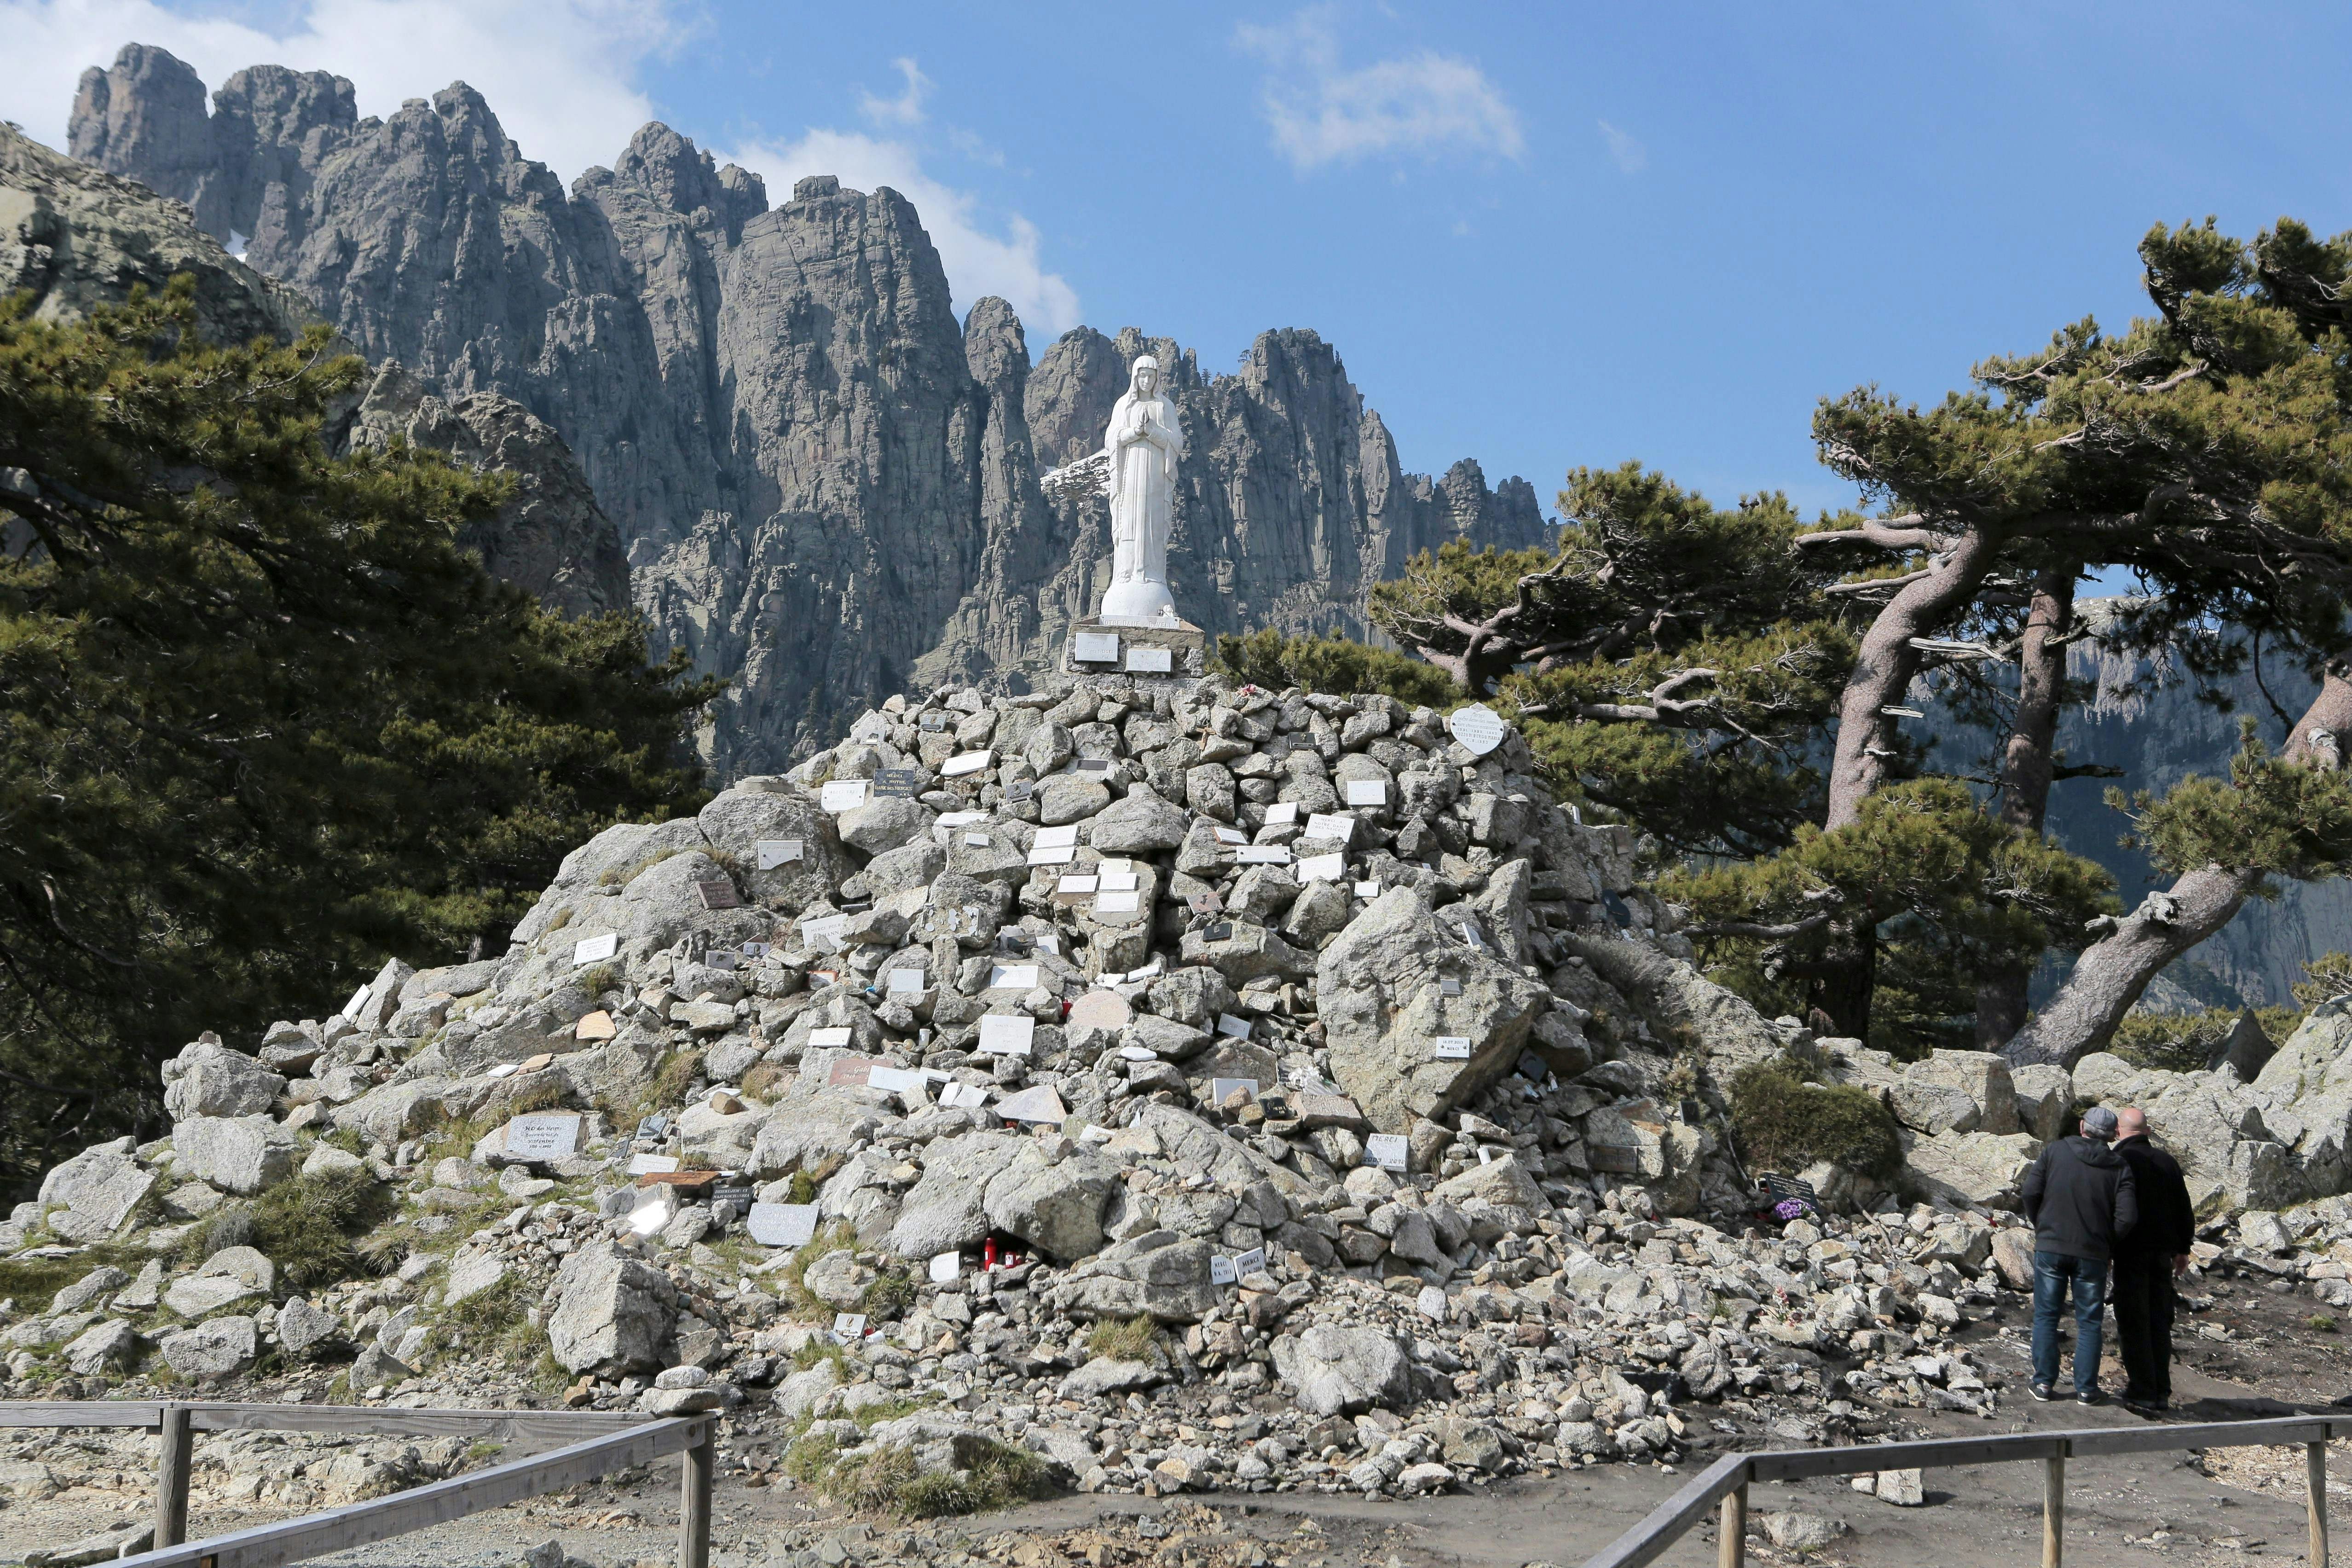 The Notre-Dame des Neiges (our lady of the snows) statue stands on the G20's Bavella pass. It's a solid grey statue of the Virgin Mary with her hands clasped in brayer standing atop a cairn of stones. 